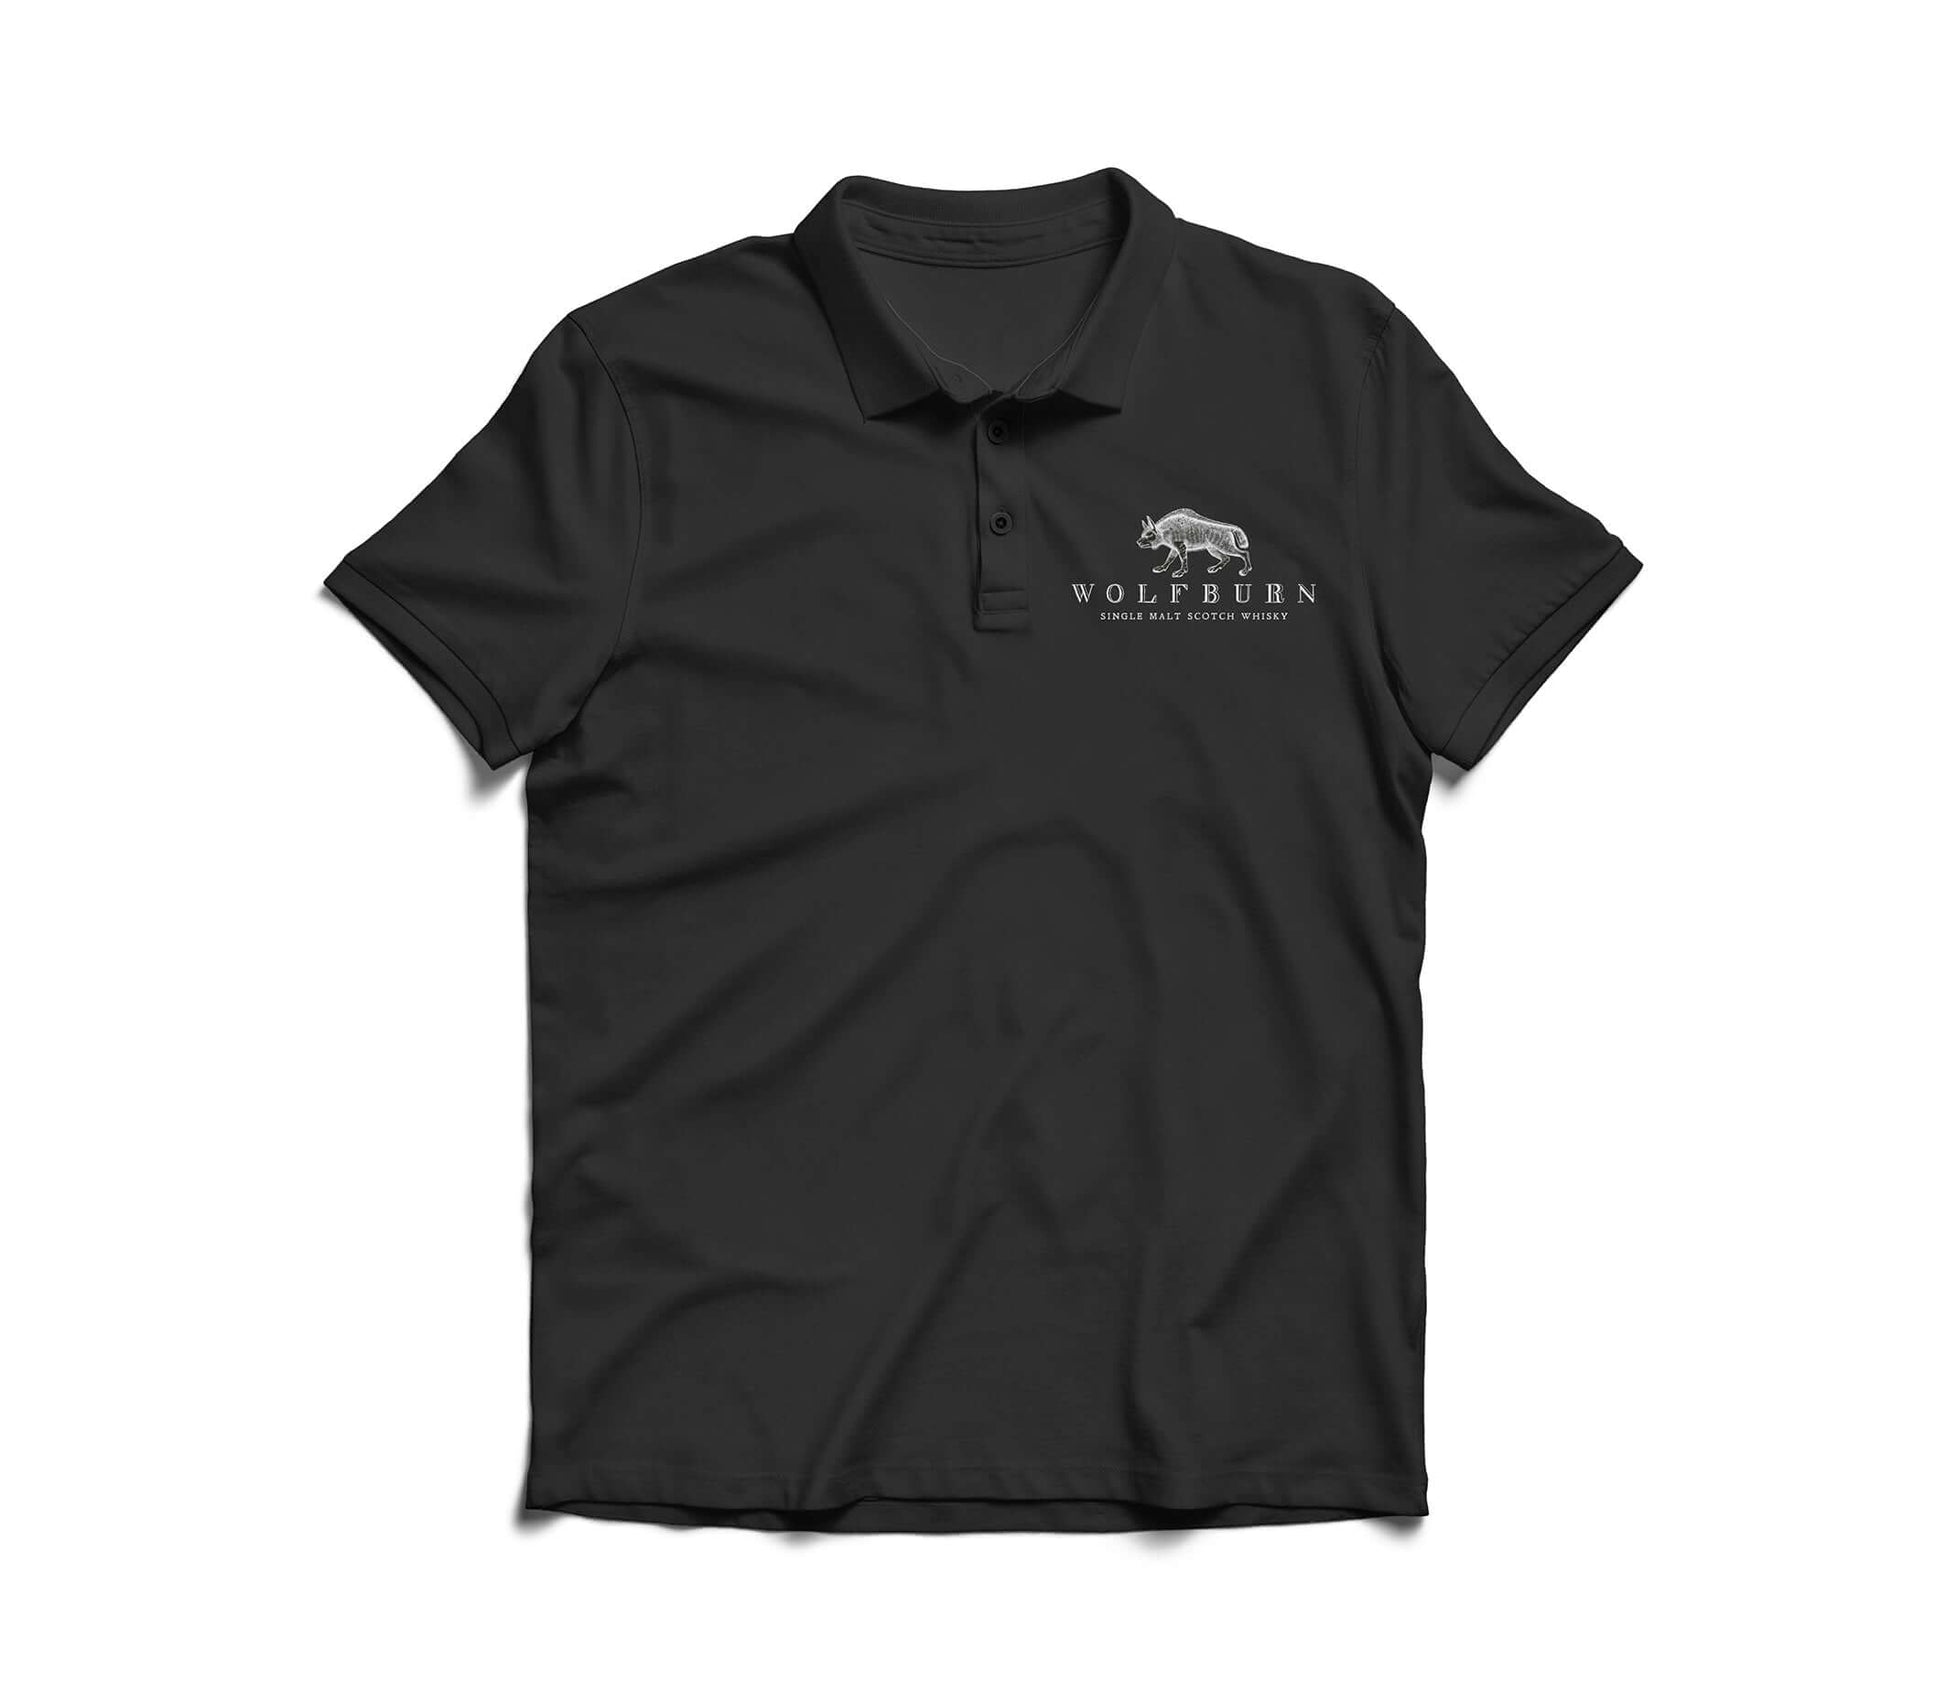 Wolfburn Polo shirt ‘Fortune Favours the Brave’ 100% cotton Polo shirt. Screen printed 'Wolfburn' logo on the chest and large Fortune Favours the Brave on the back.